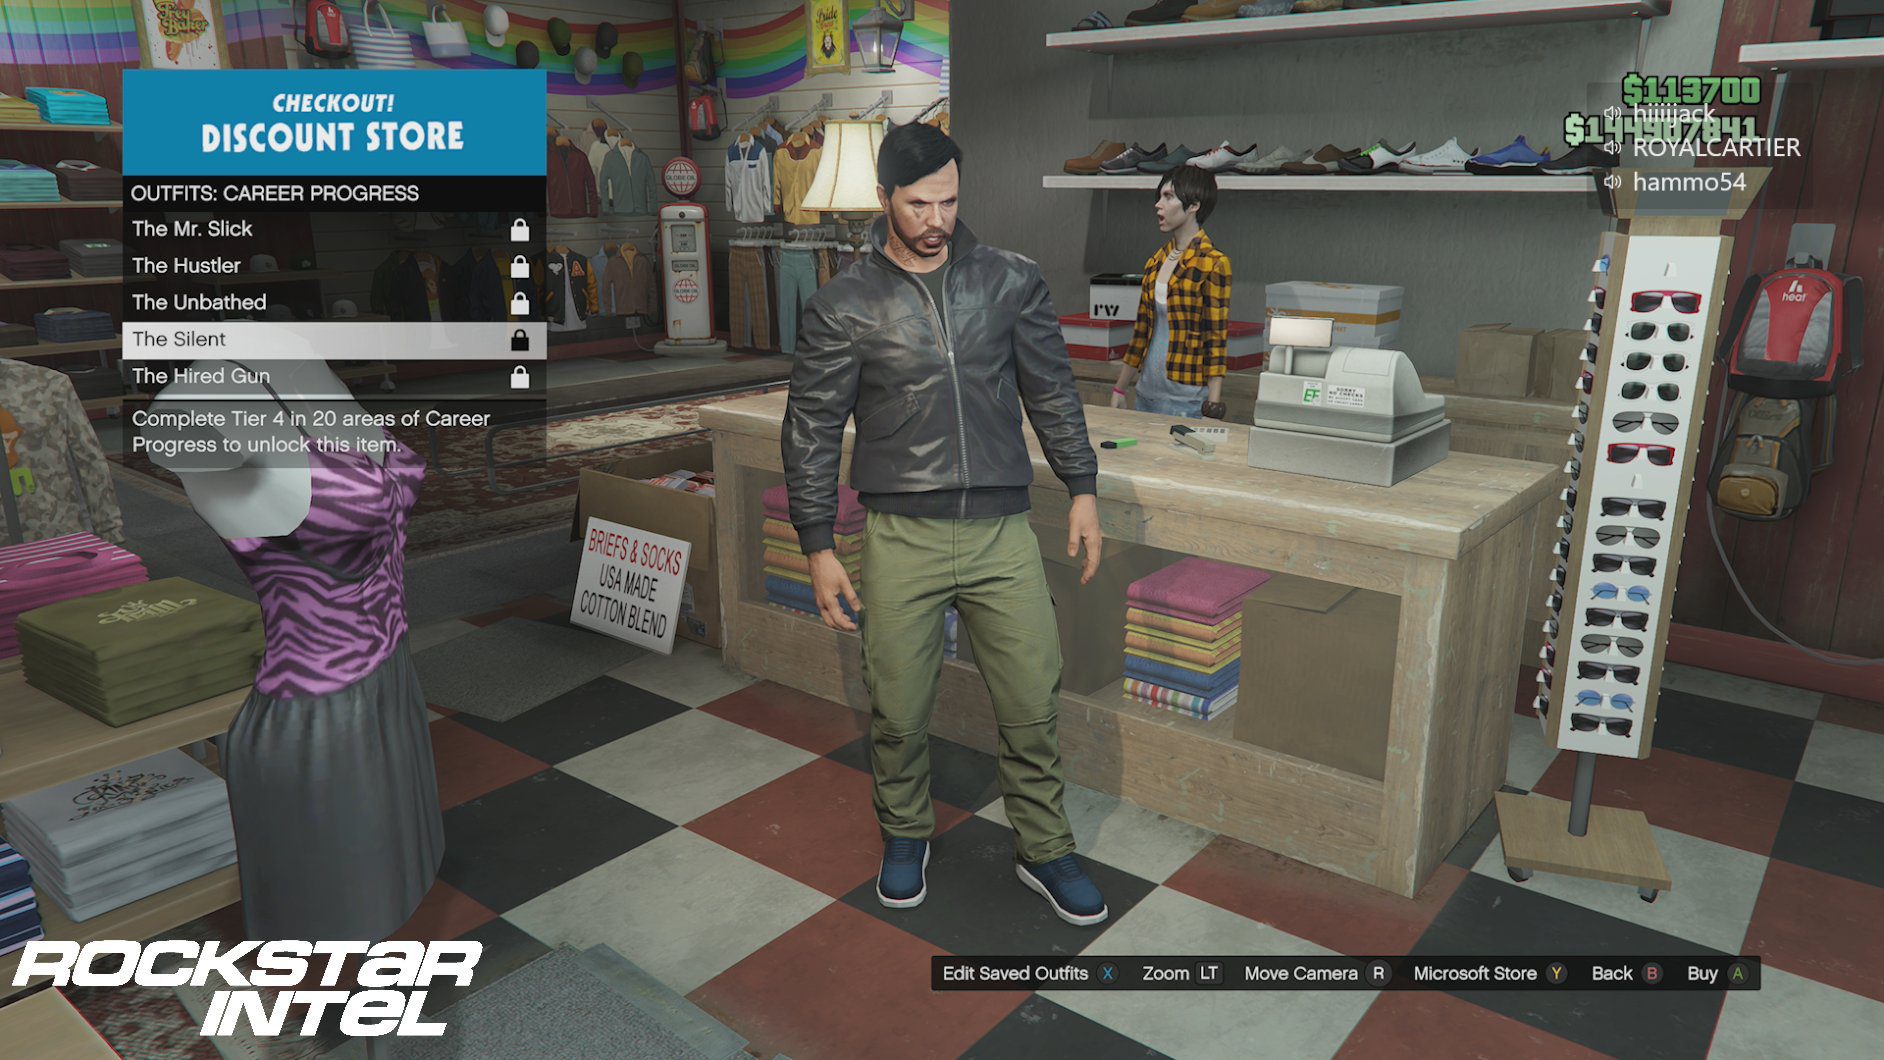 These GTA Online Outfits Grant Hidden Perks To Players - GTA BOOM